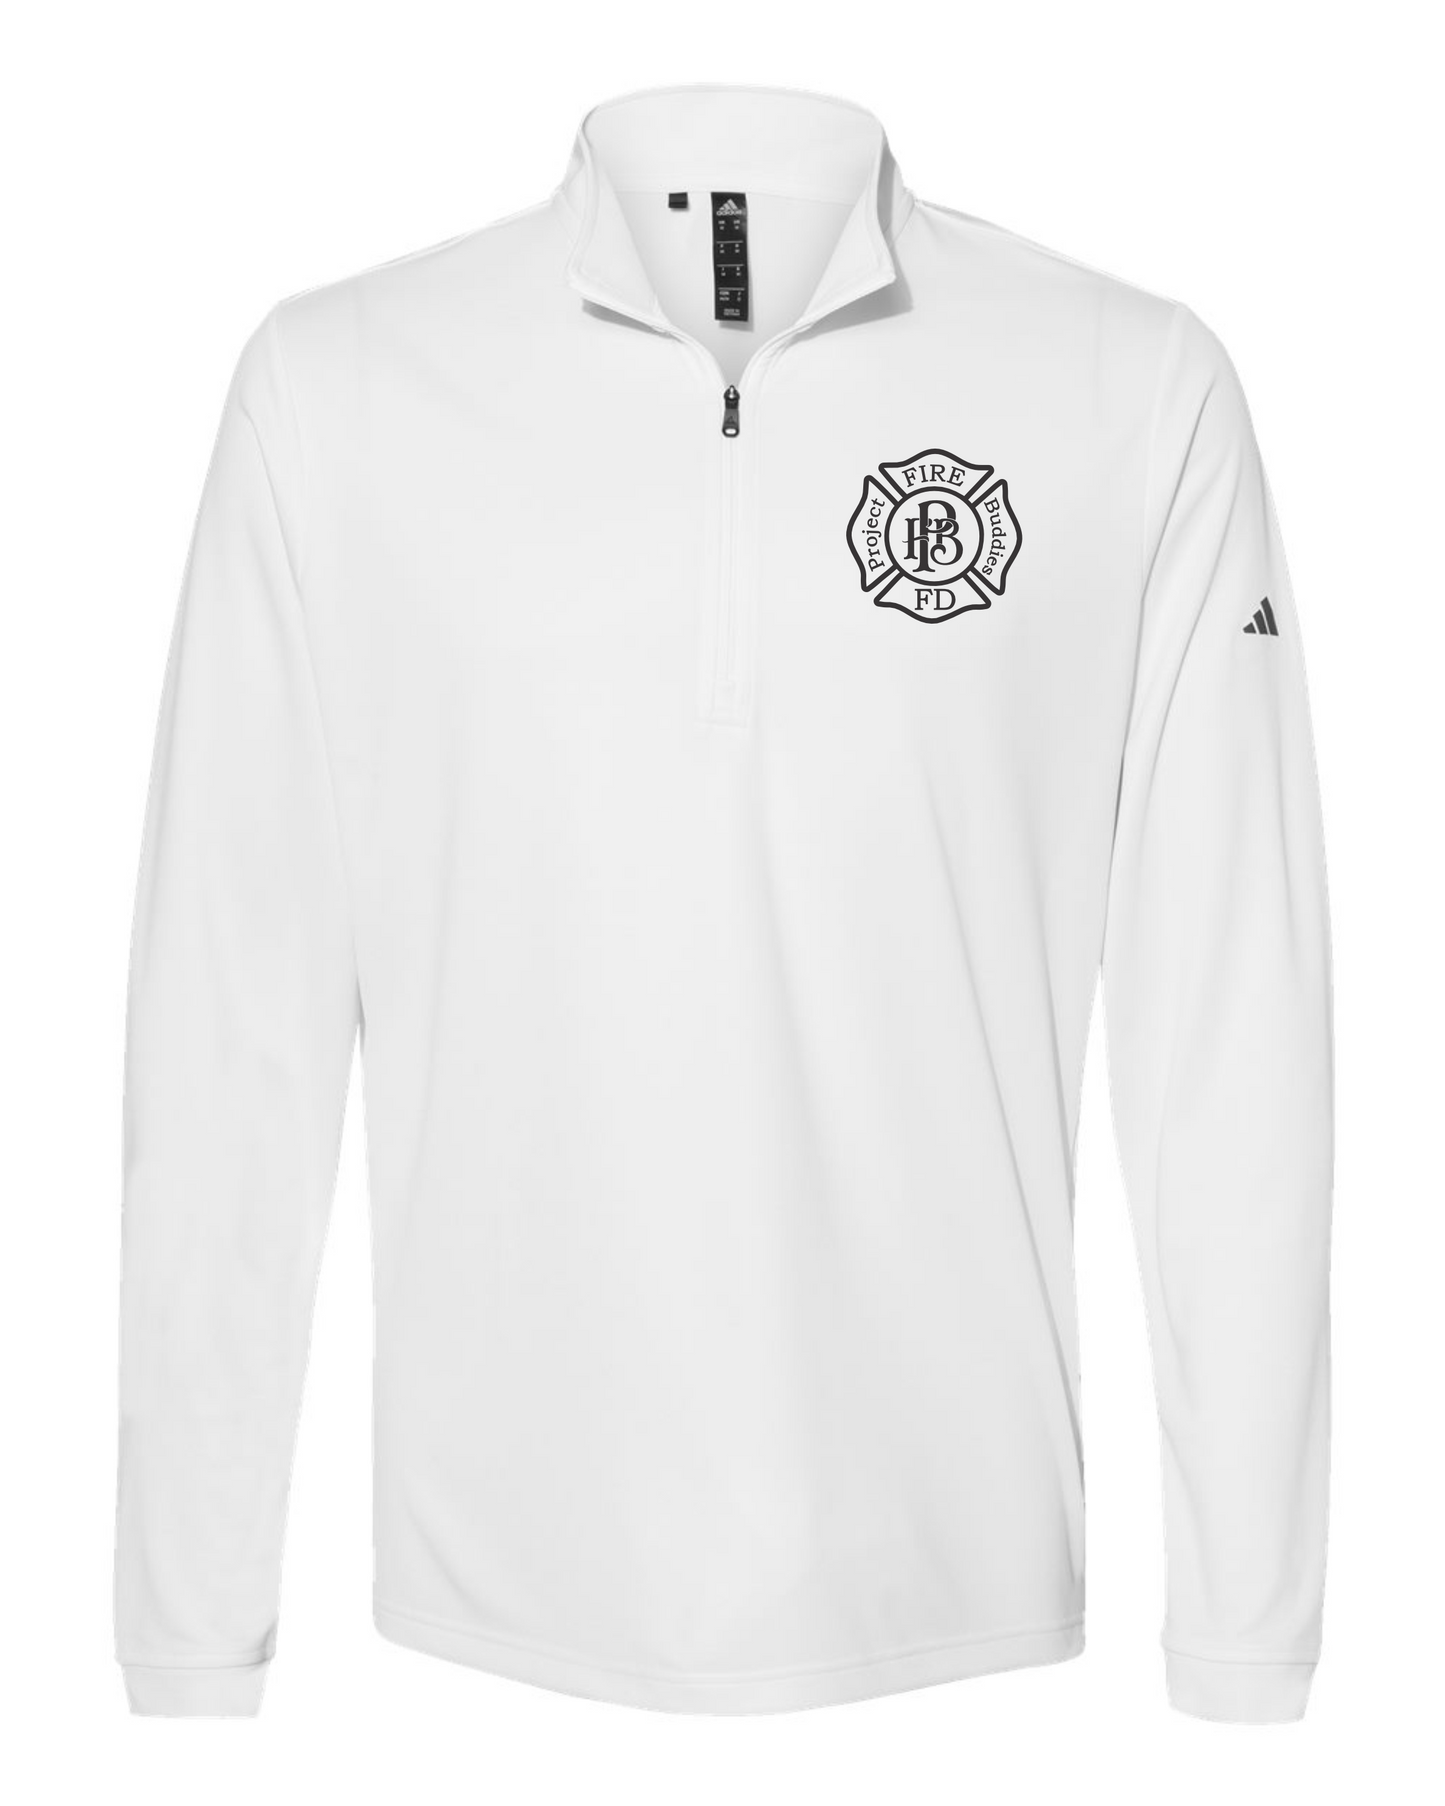 Adidas Lightweight Quarter-Zip Pullover - with PFB embroidered Maltese